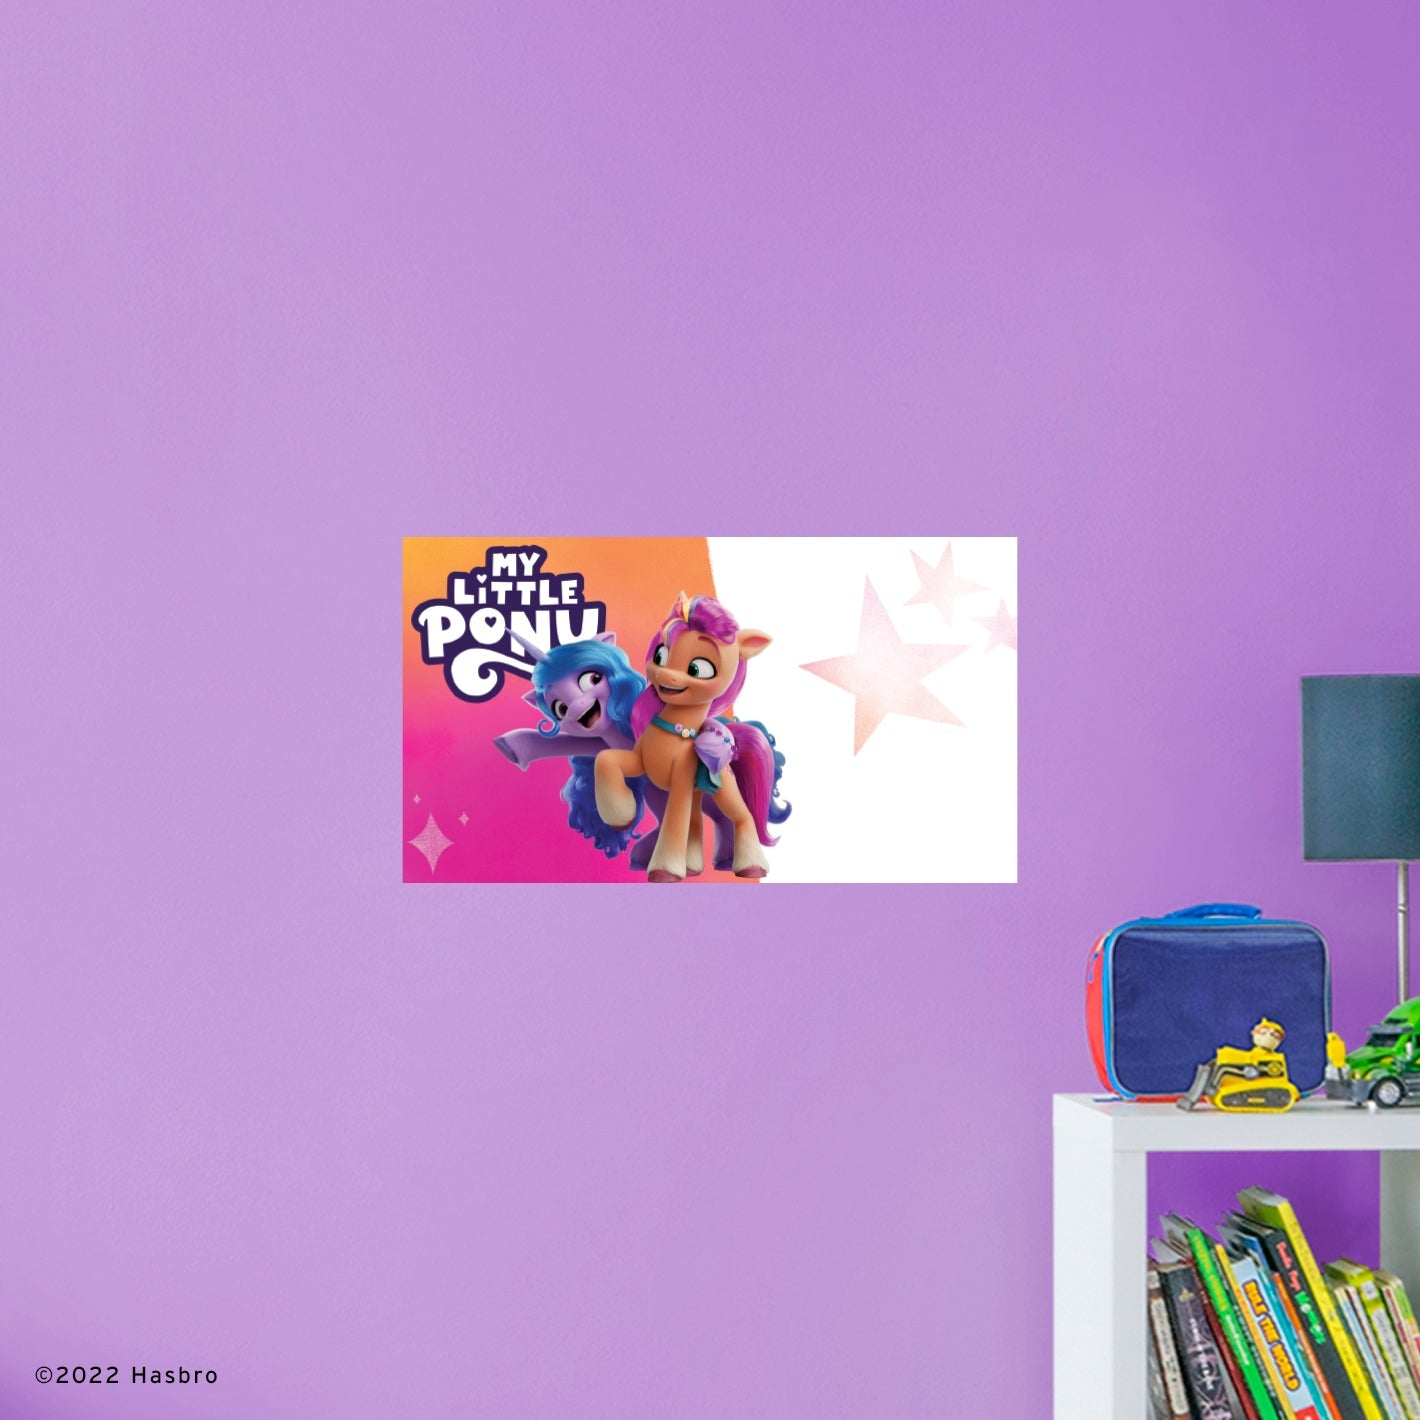 My Little Pony Movie 2: Friends Dry Erase - Officially Licensed Hasbro Removable Adhesive Decal